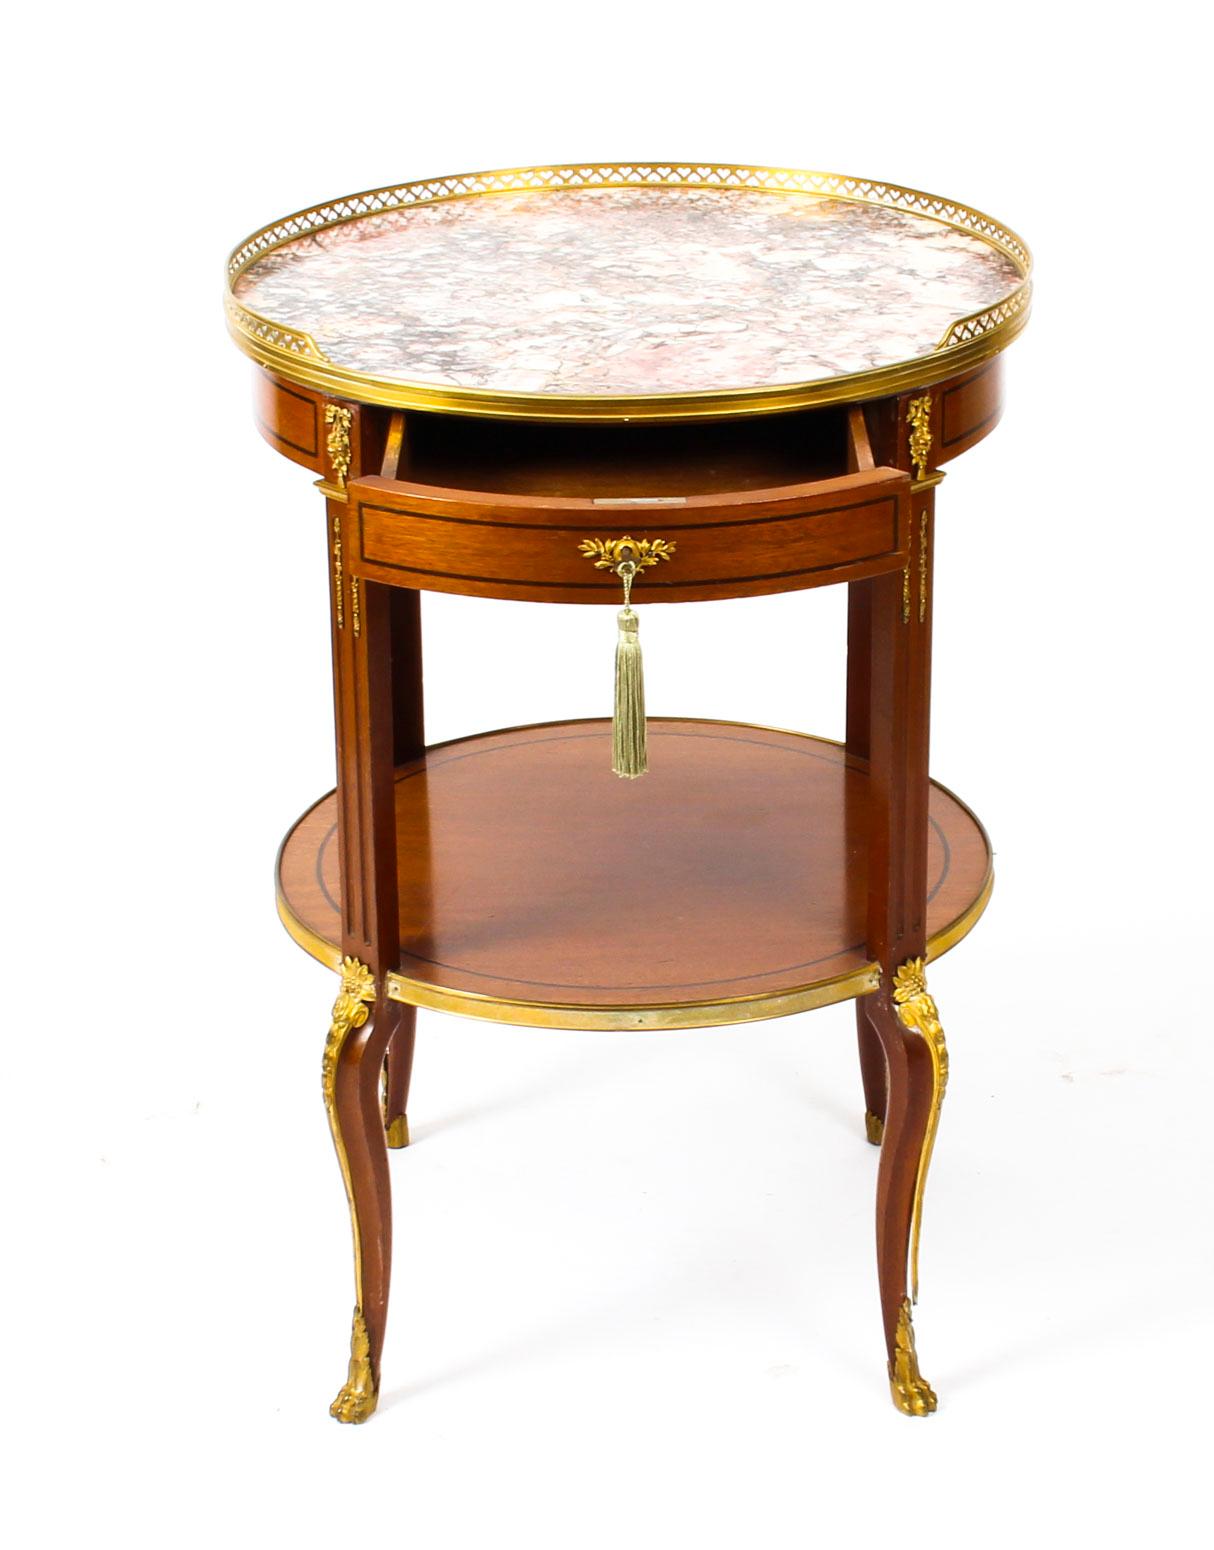 Antique French Louis Revival Marble and Ormolu Occasional Table, 19th Century For Sale 6